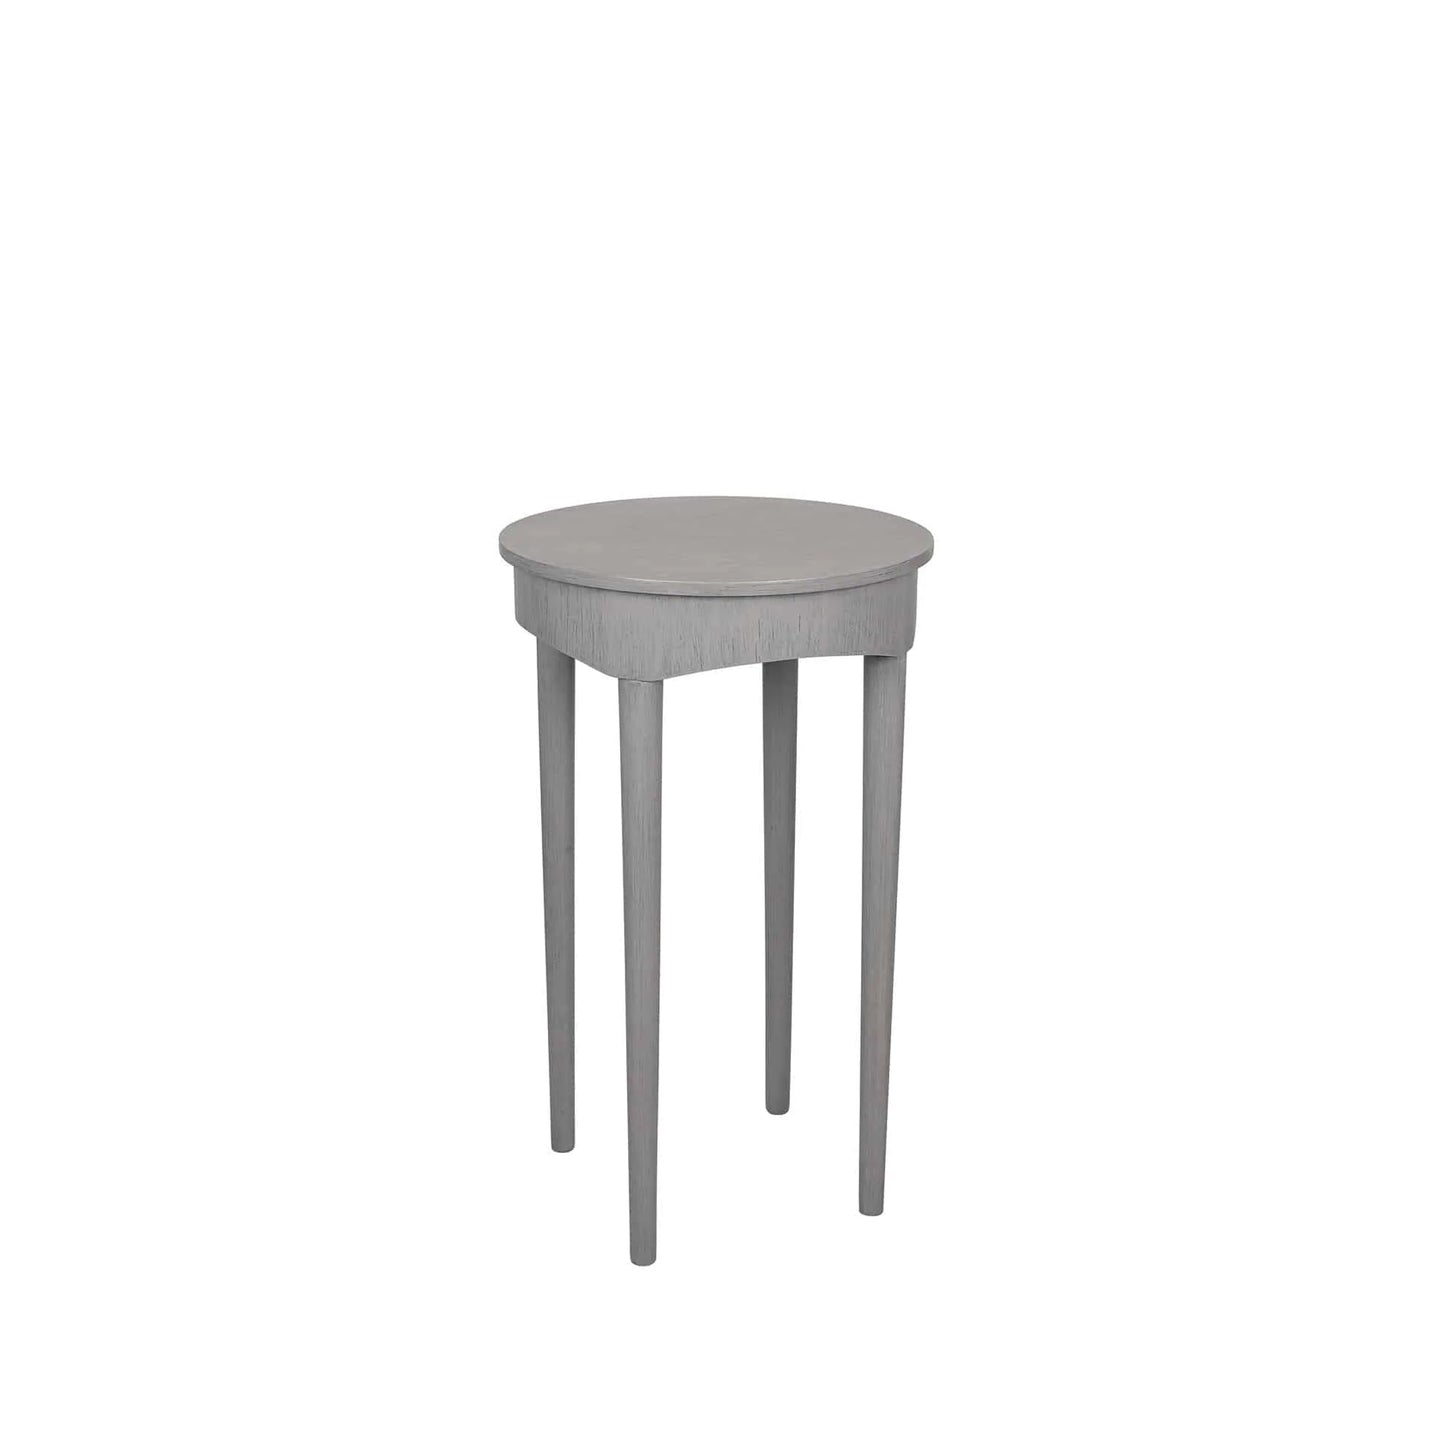 Dark Grey Pine Wood Round Occasional Table for sale - Woodcock and Cavendish